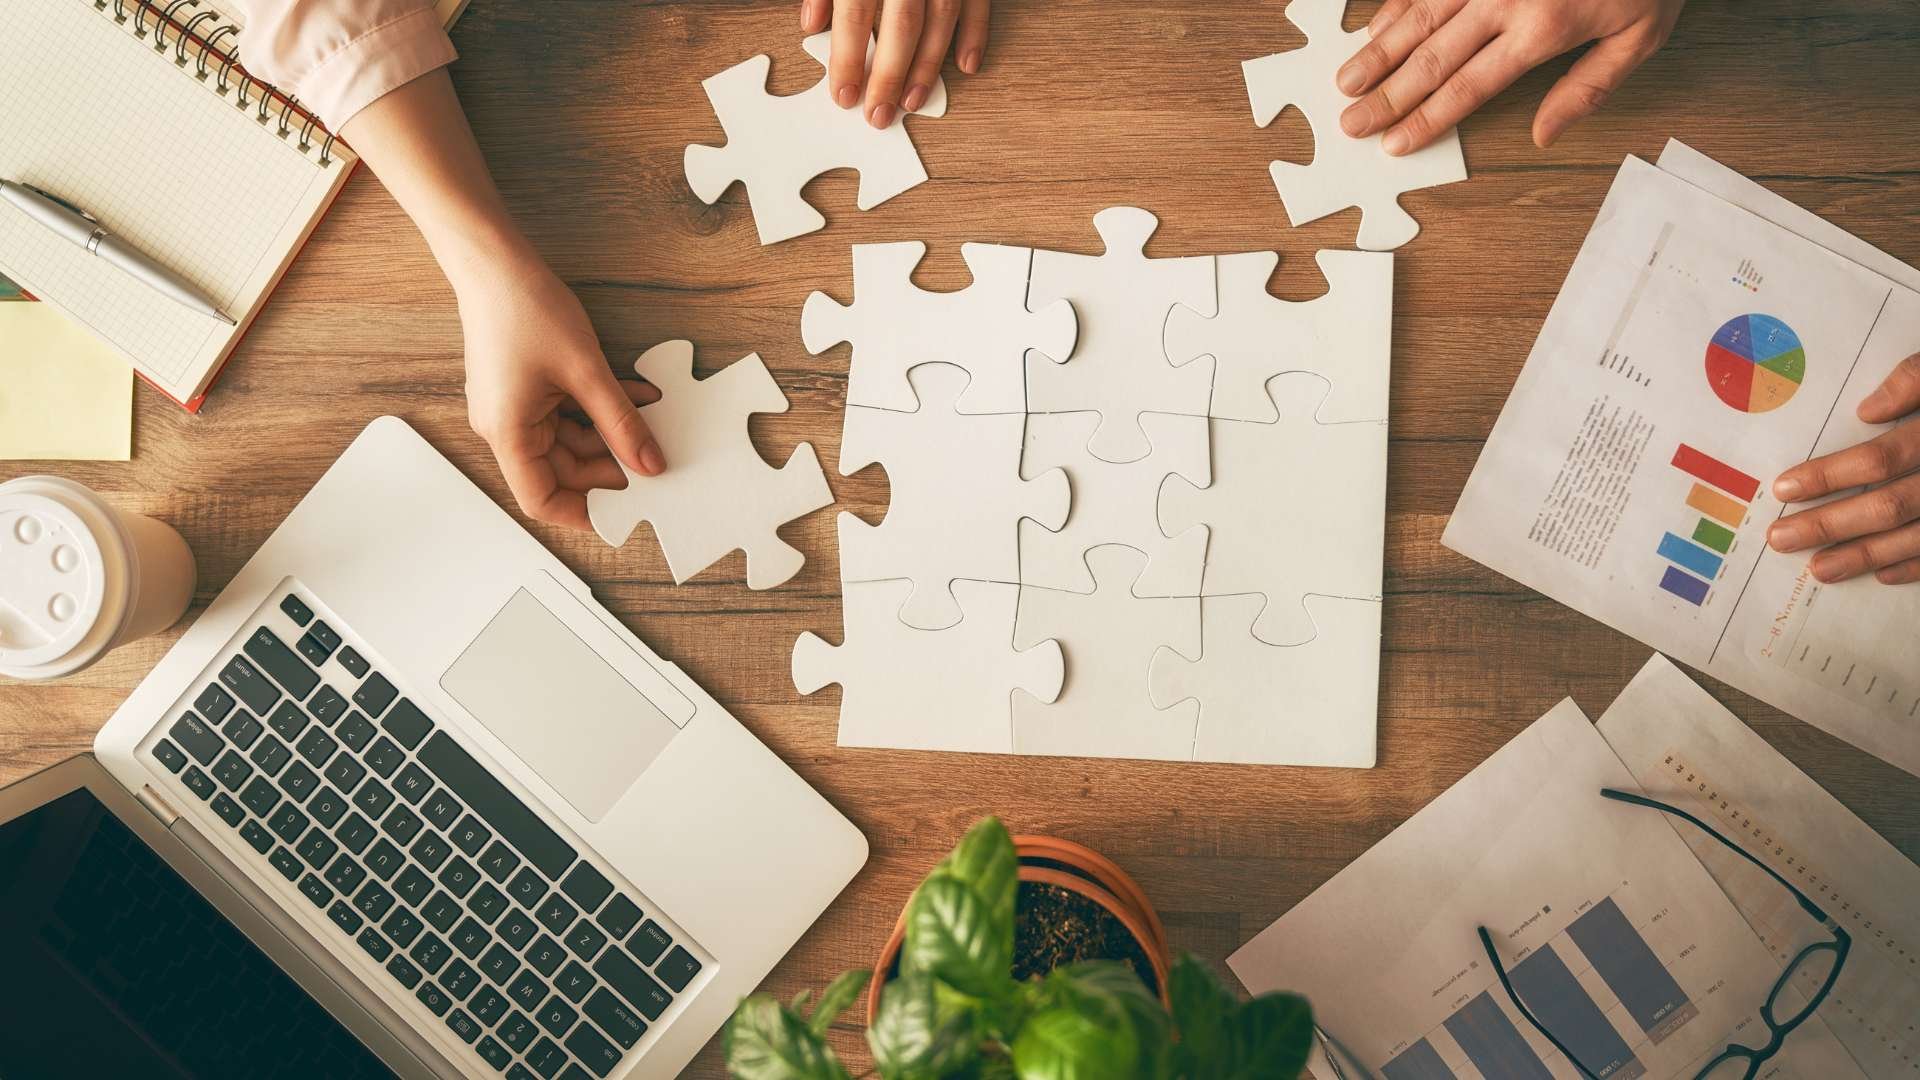 Hands assembling a jigsaw puzzle beside a laptop and business reports, symbolizing Fluid IT's versatile solutions tailored to Dallas business goals.